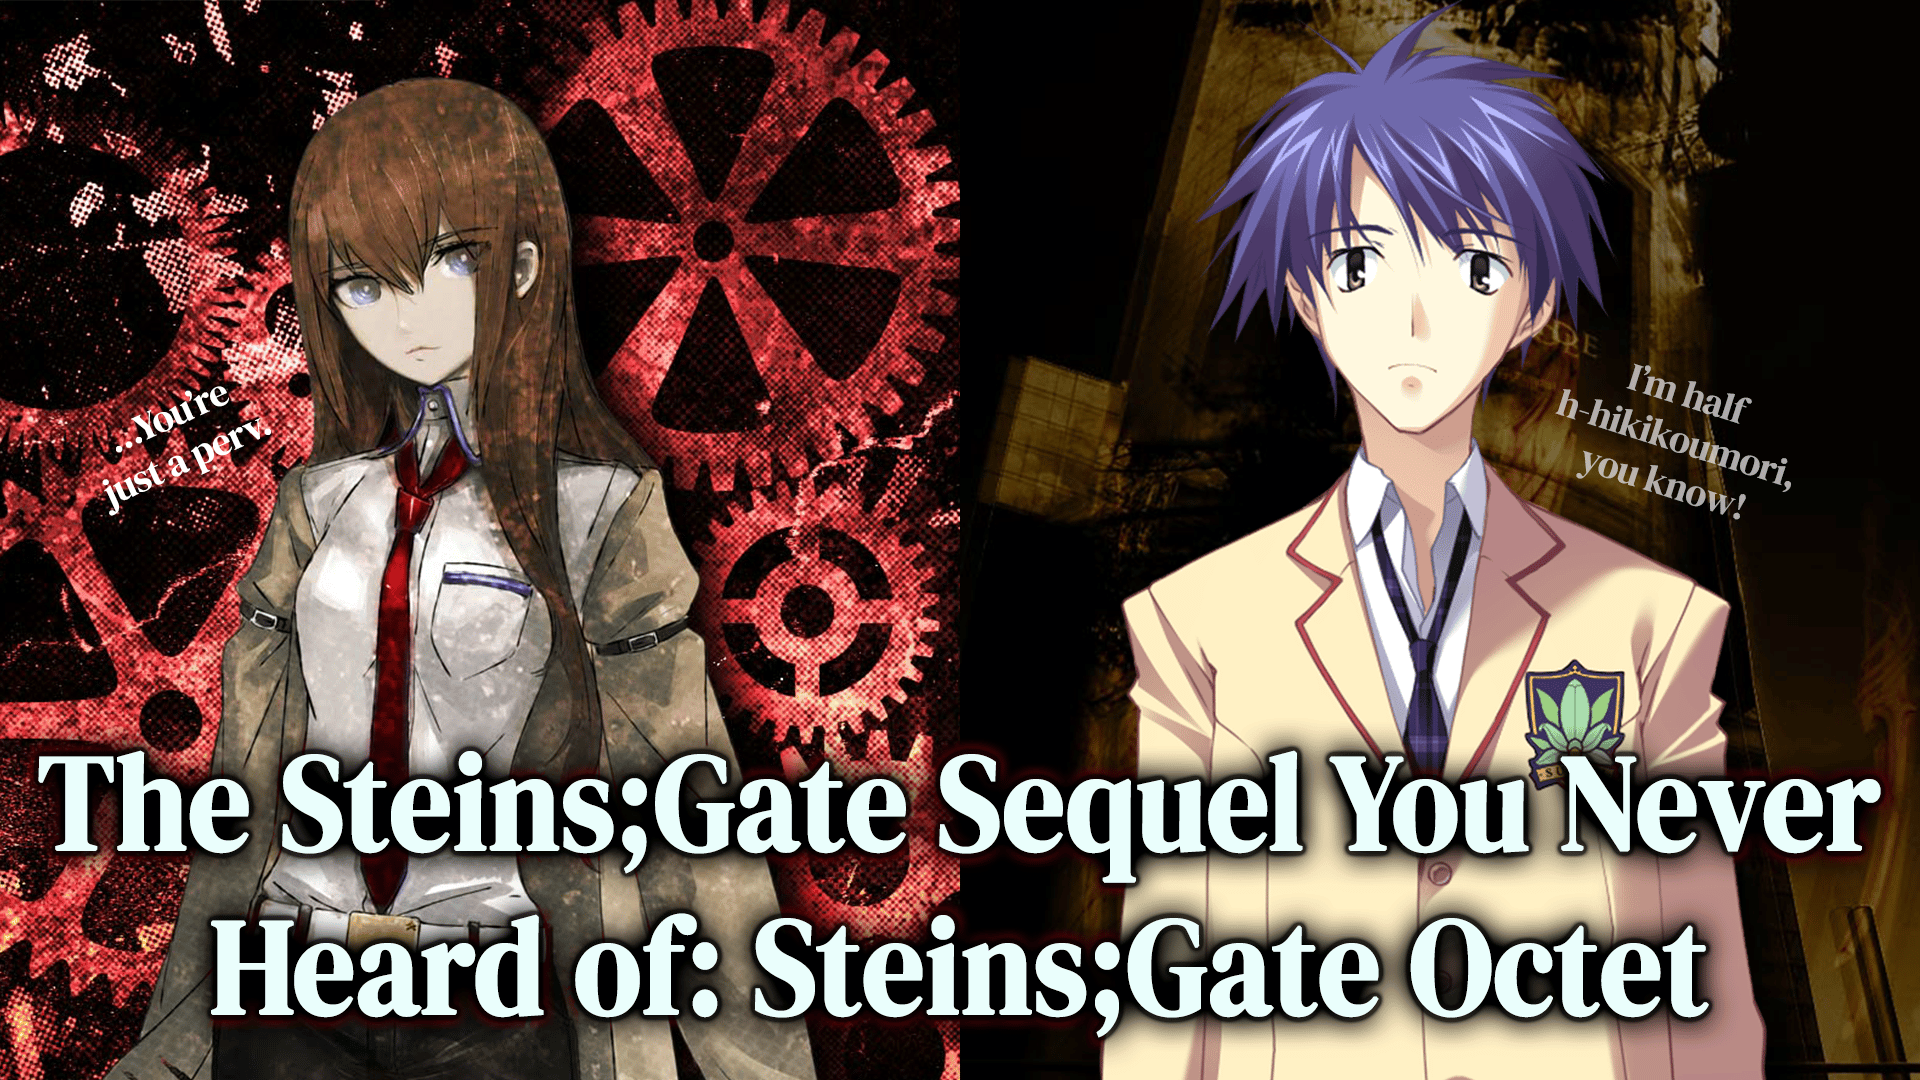 The Steins;Gate Sequel You Never Heard Of: Steins;Gate: Variant Space Octet